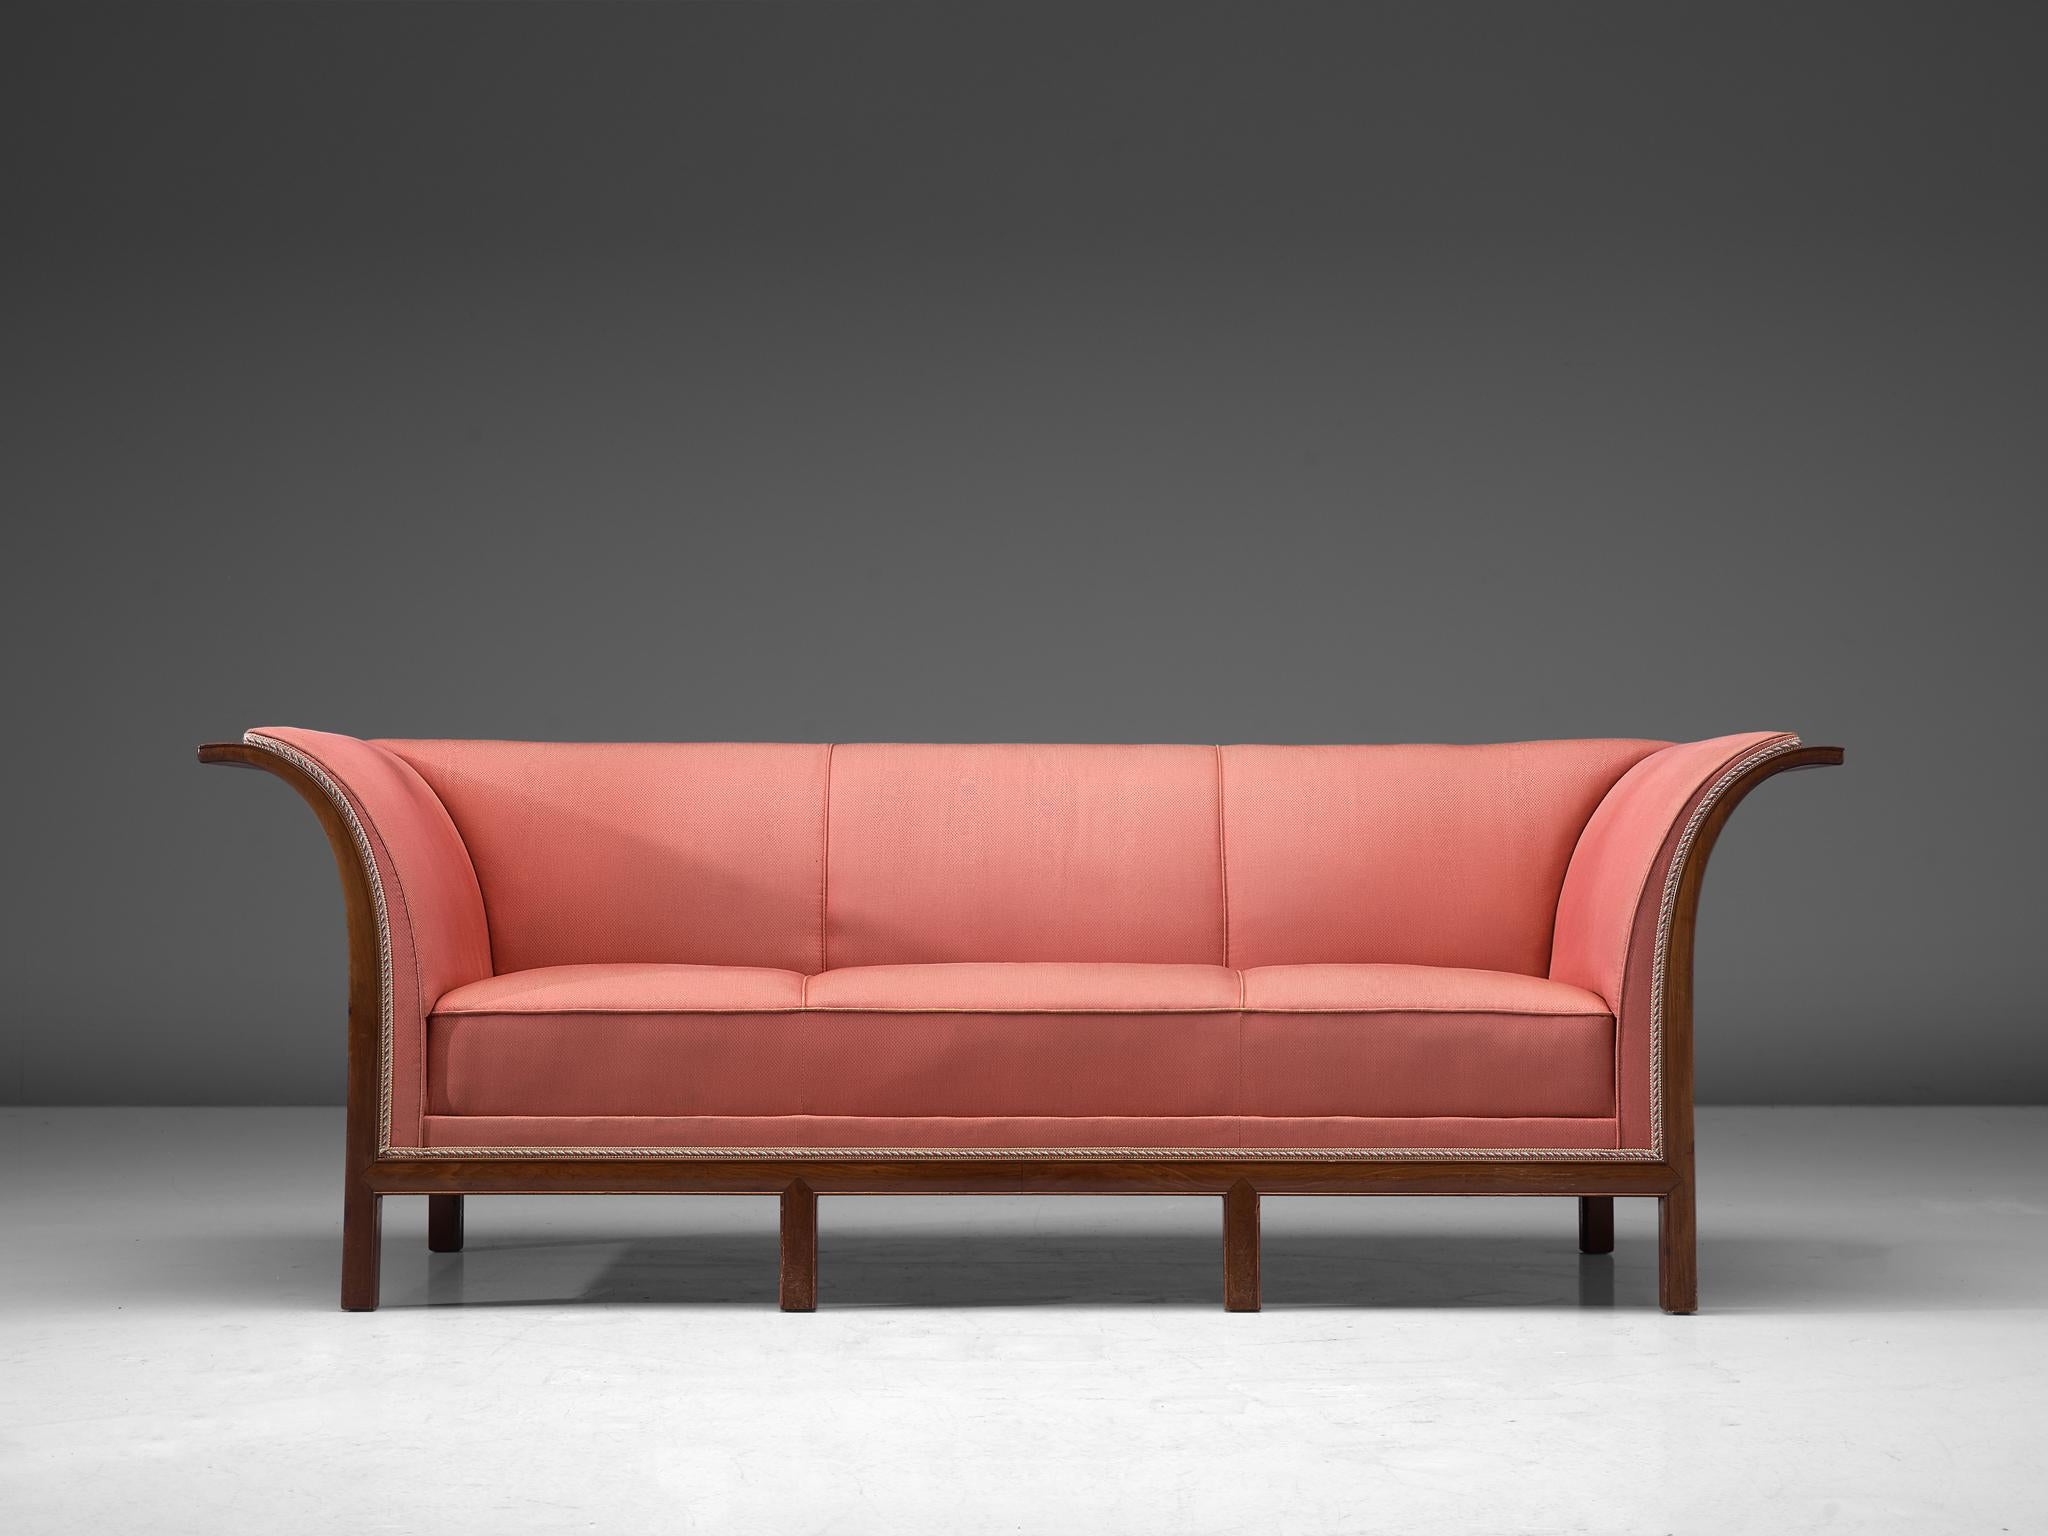 Frits Henningsen, sofa in mahogany and pink fabric, Denmark, 1930s.

This classic sofa was designed and produced by master cabinet maker Frits Henningsen around the 1930s. The basic design is well balanced, showing an interesting contrast between